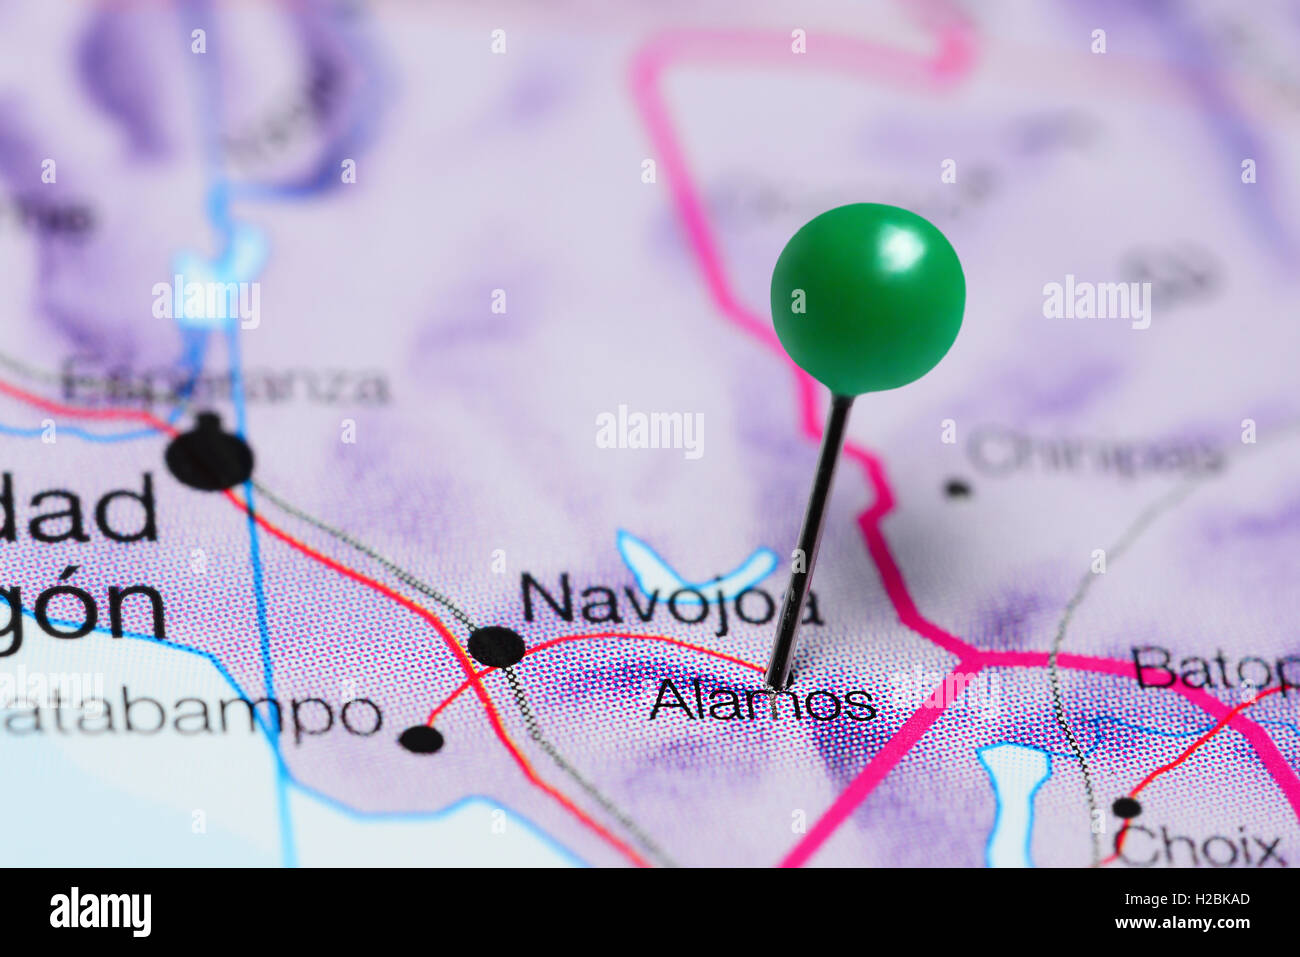 Alamos pinned on a map of Mexico Stock Photo